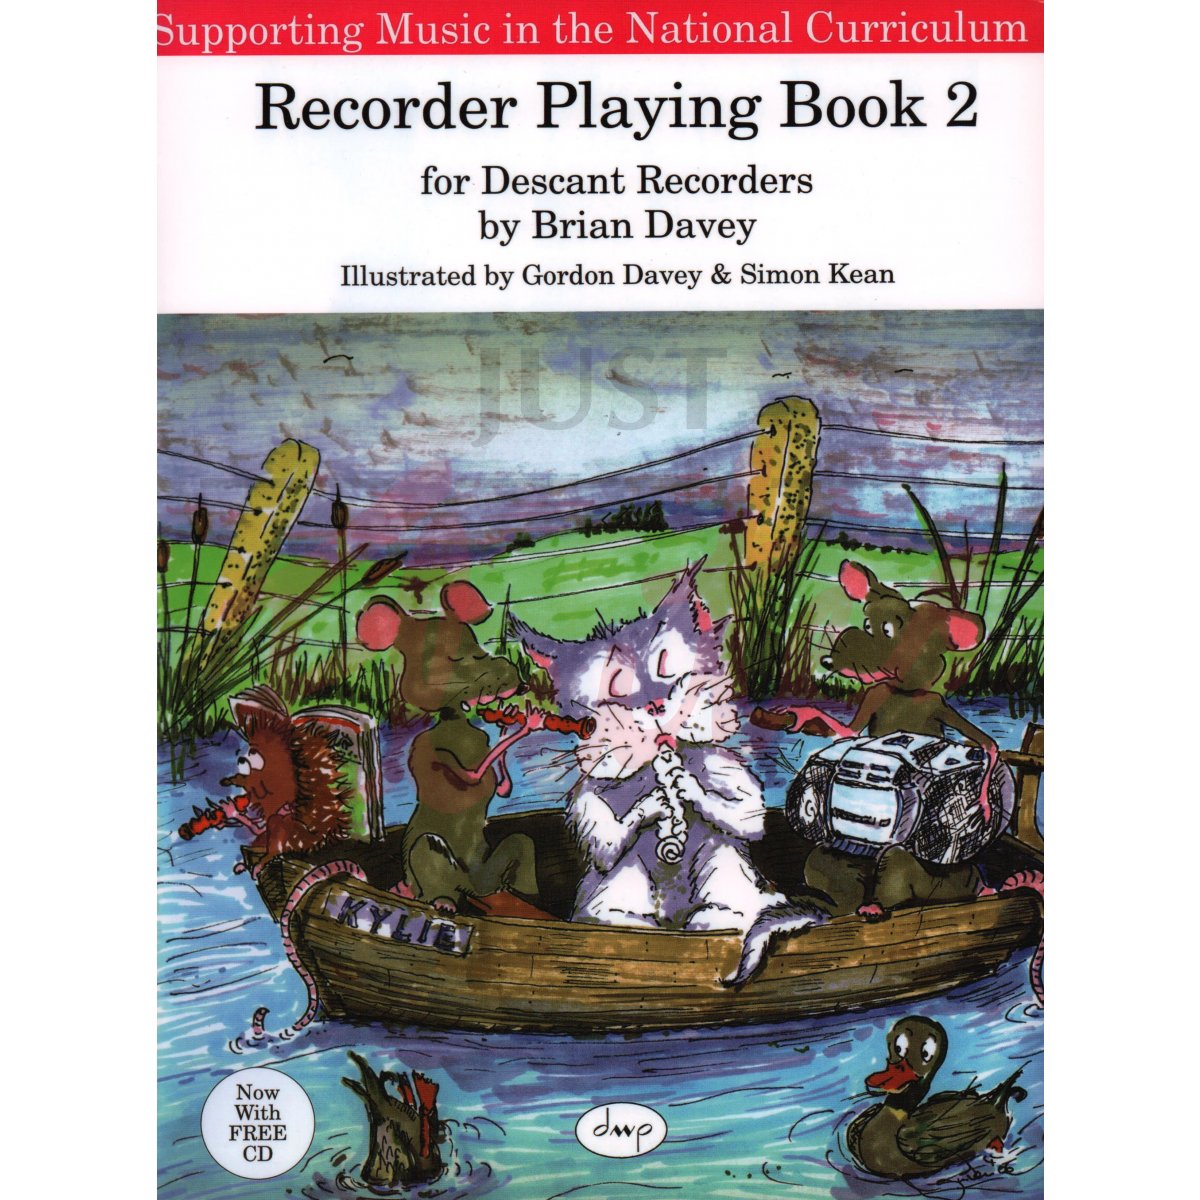 Recorder Playing Book 2 for Descant Recorders